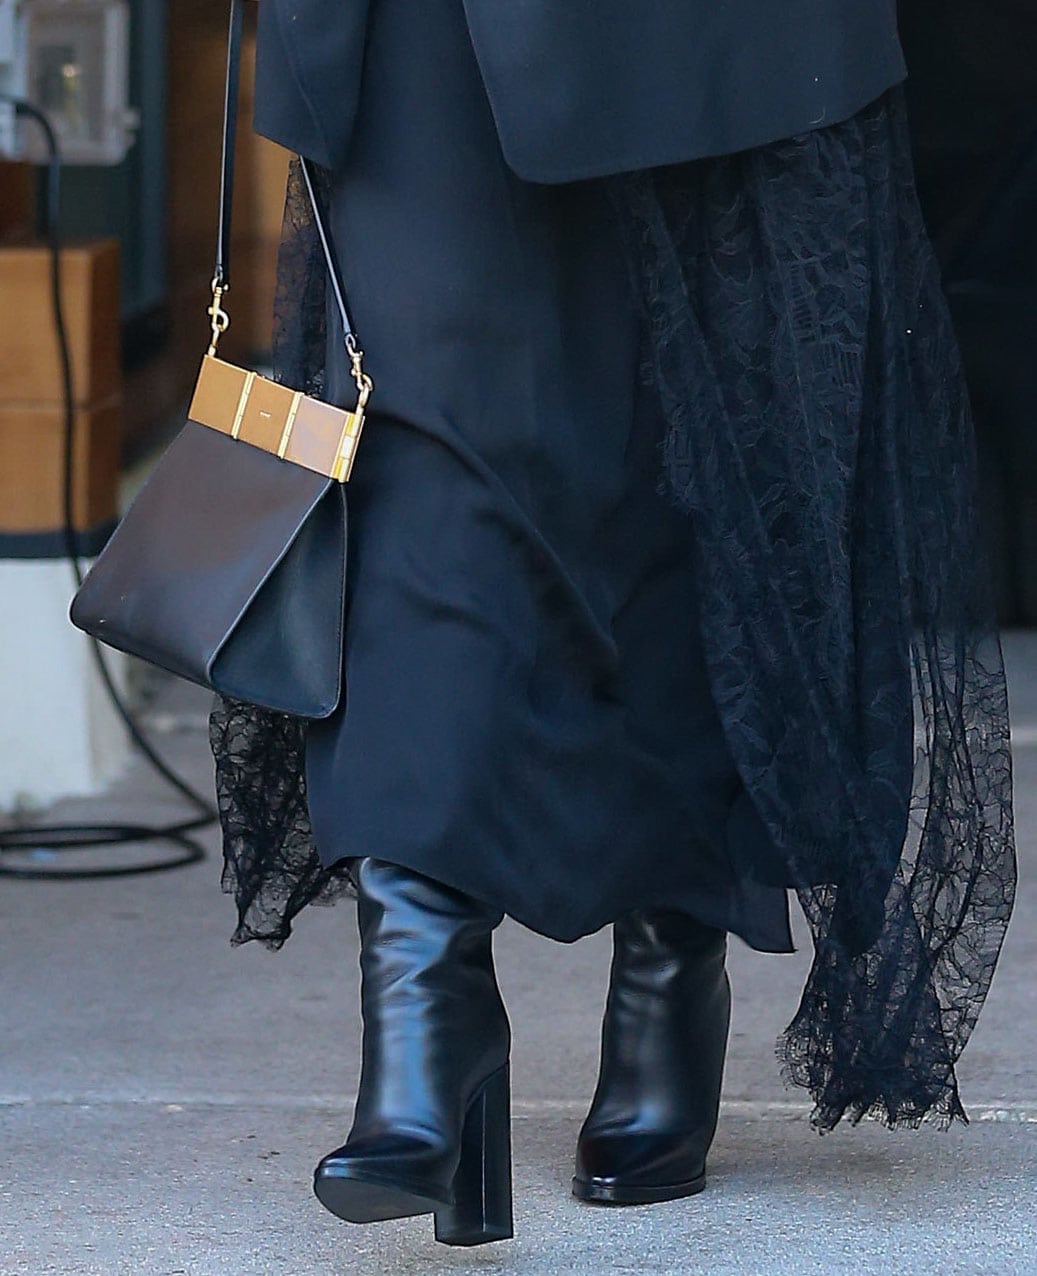 Chrissy Teigen pairs her lace maxi dress with Saint Laurent Cleveland knee-high boots